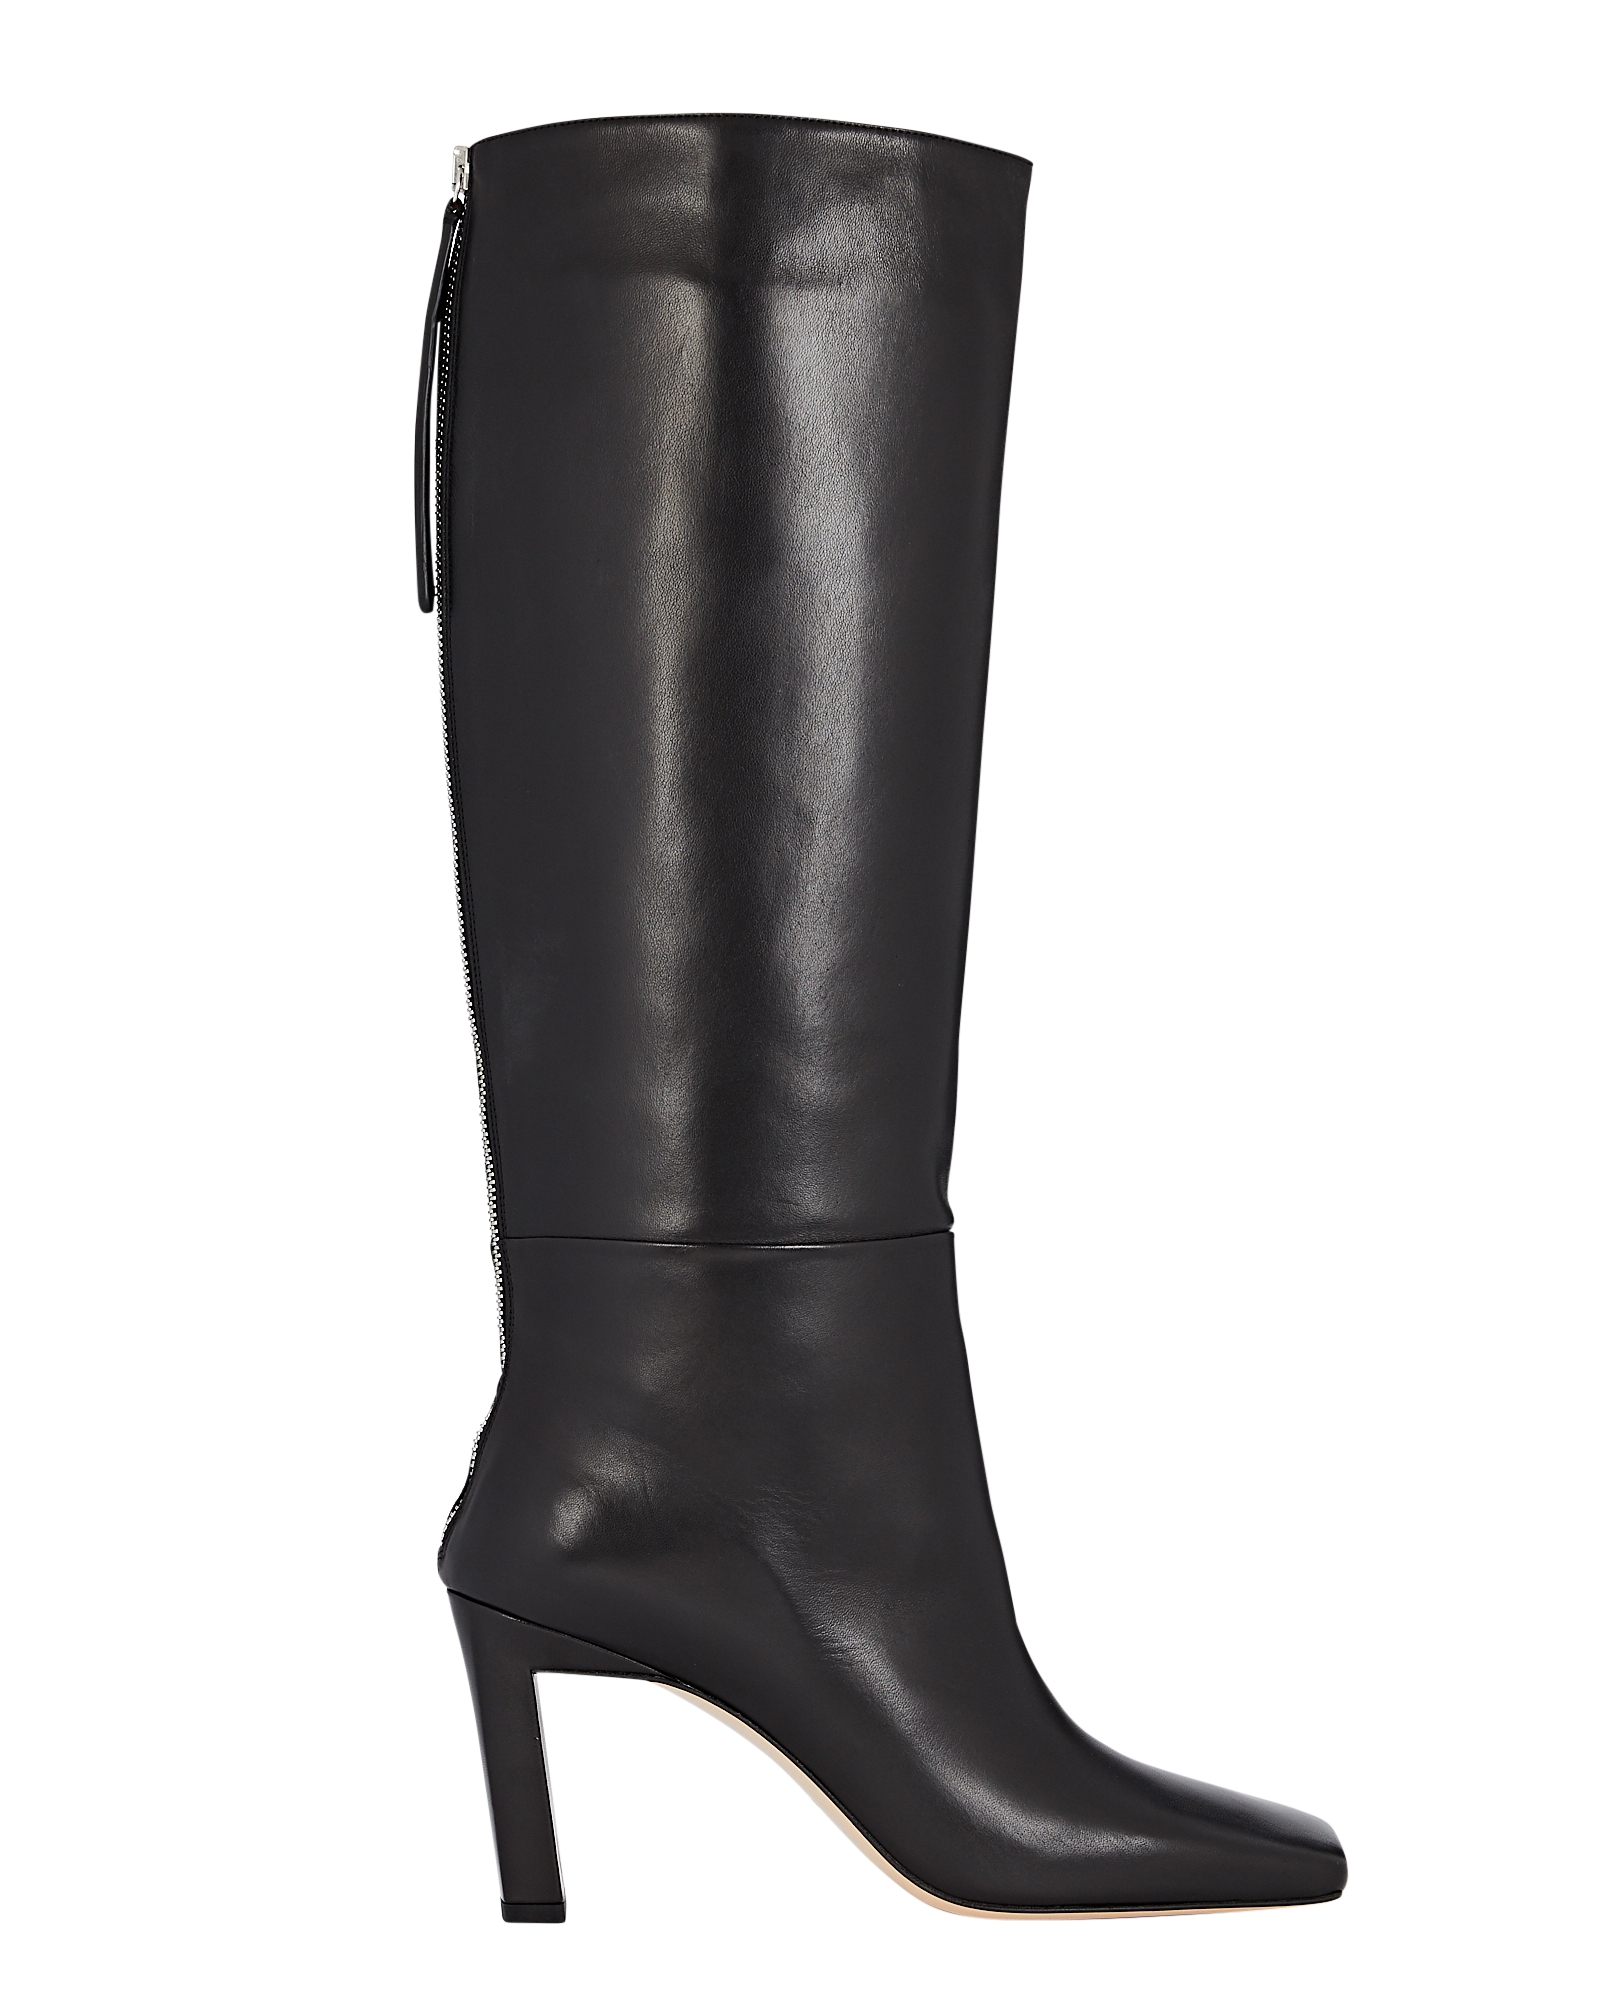 Wandler Isa Knee-High Leather Boots | INTERMIX®